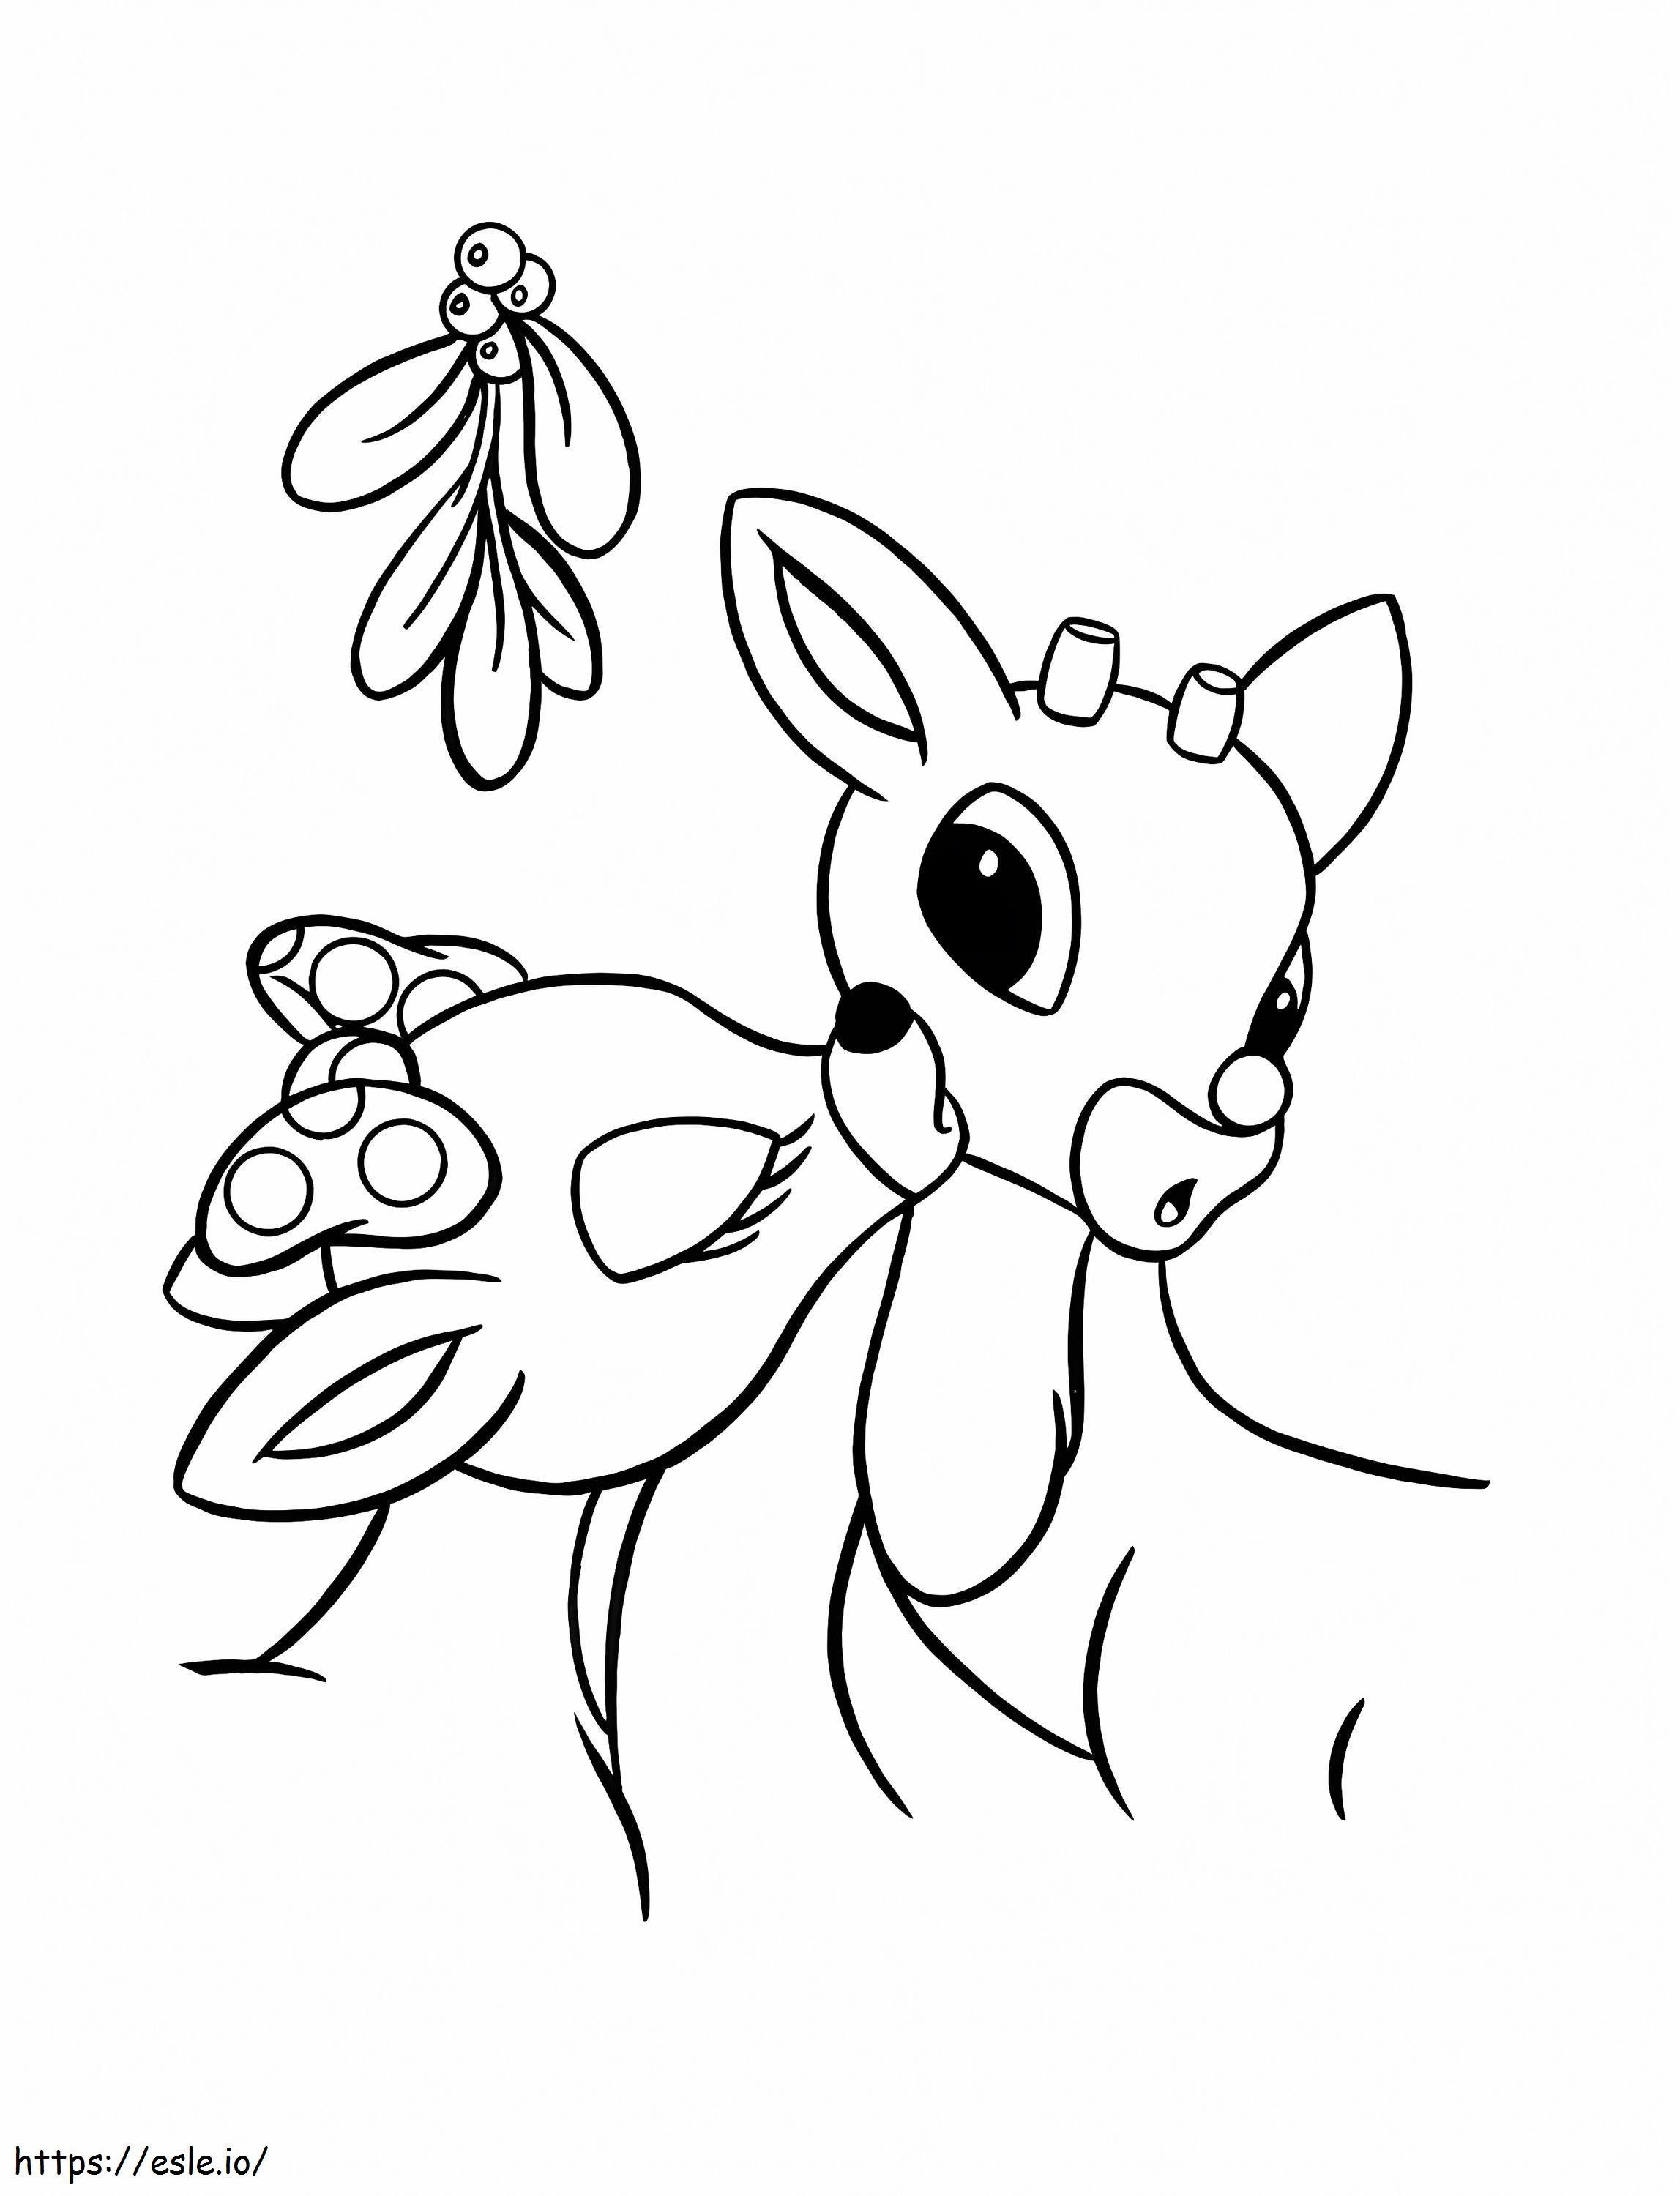 Rudolph And Clarice coloring page